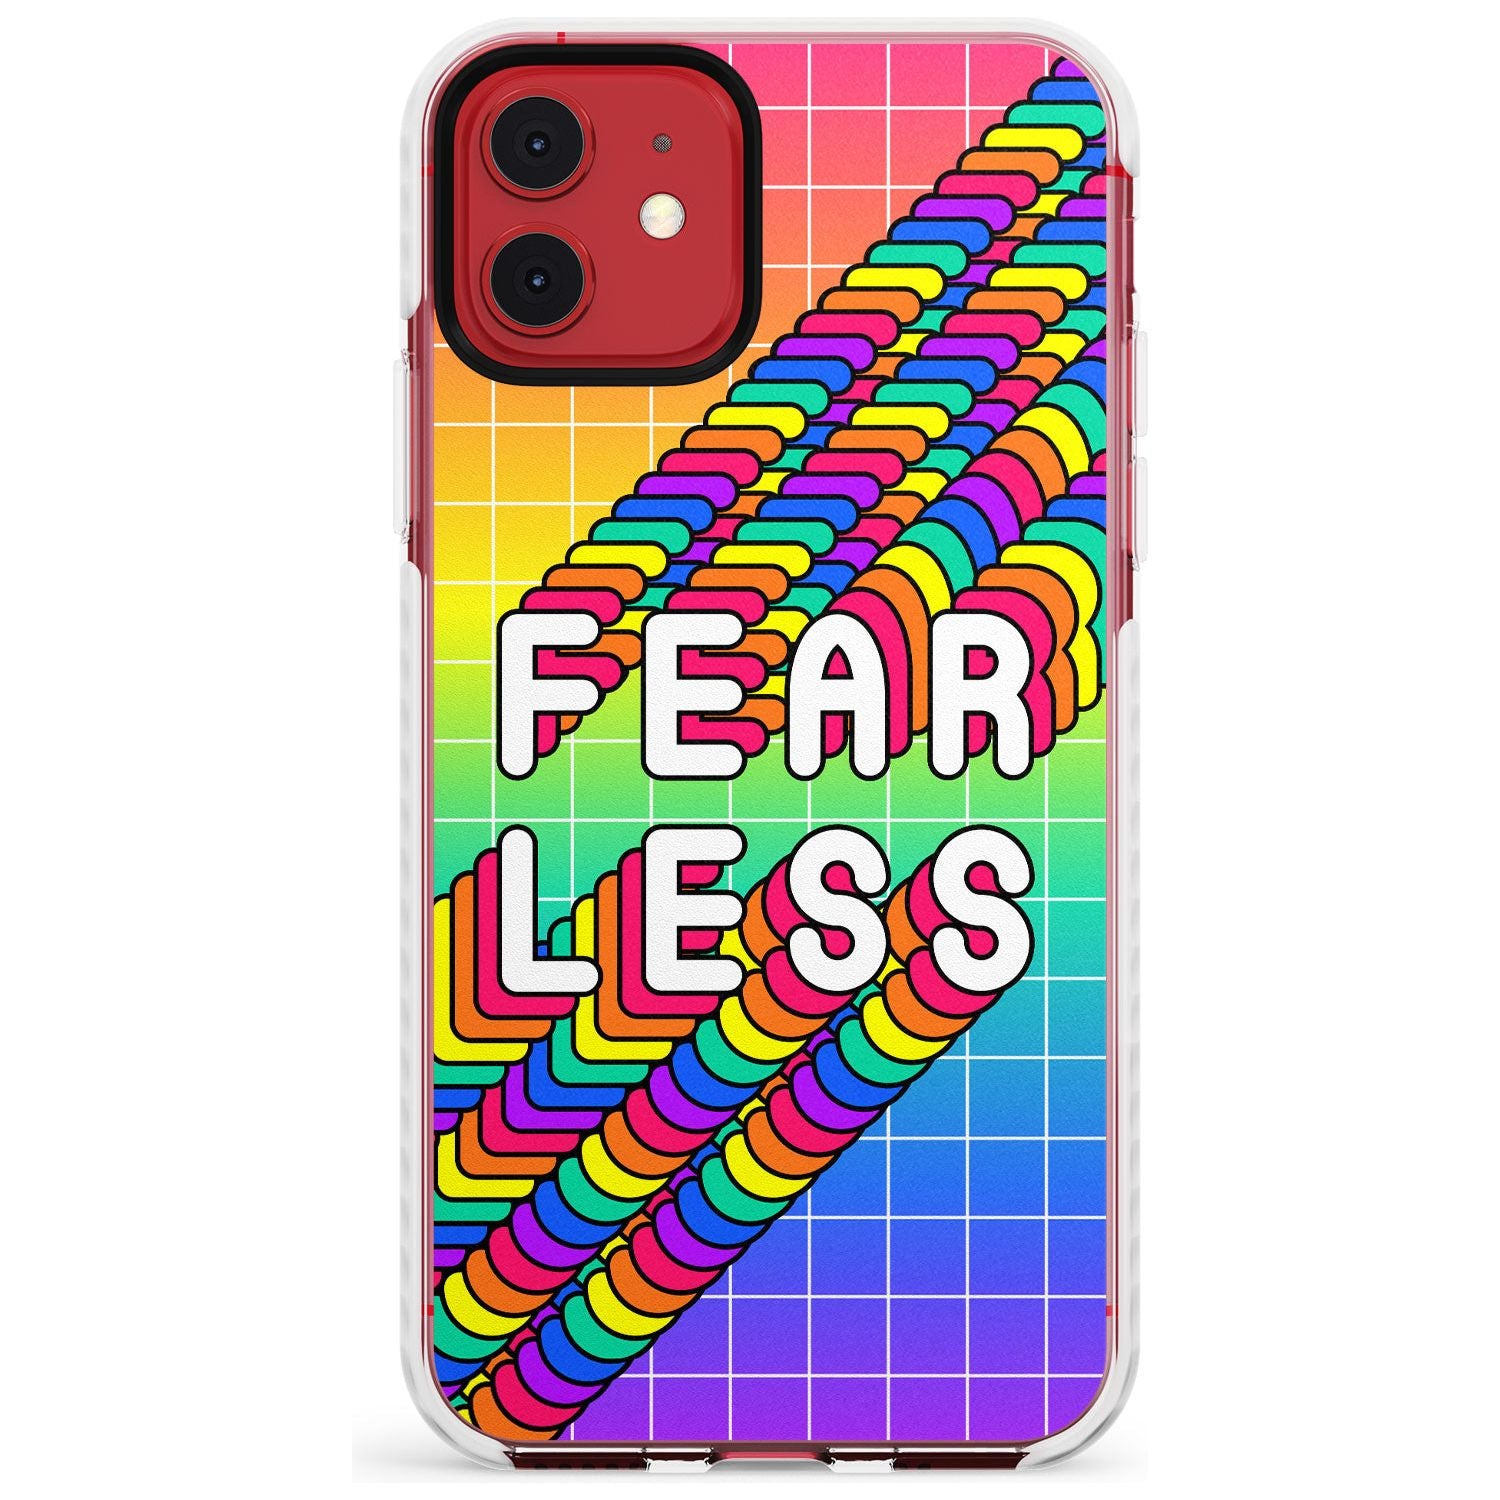 Fearless Impact Phone Case for iPhone 11